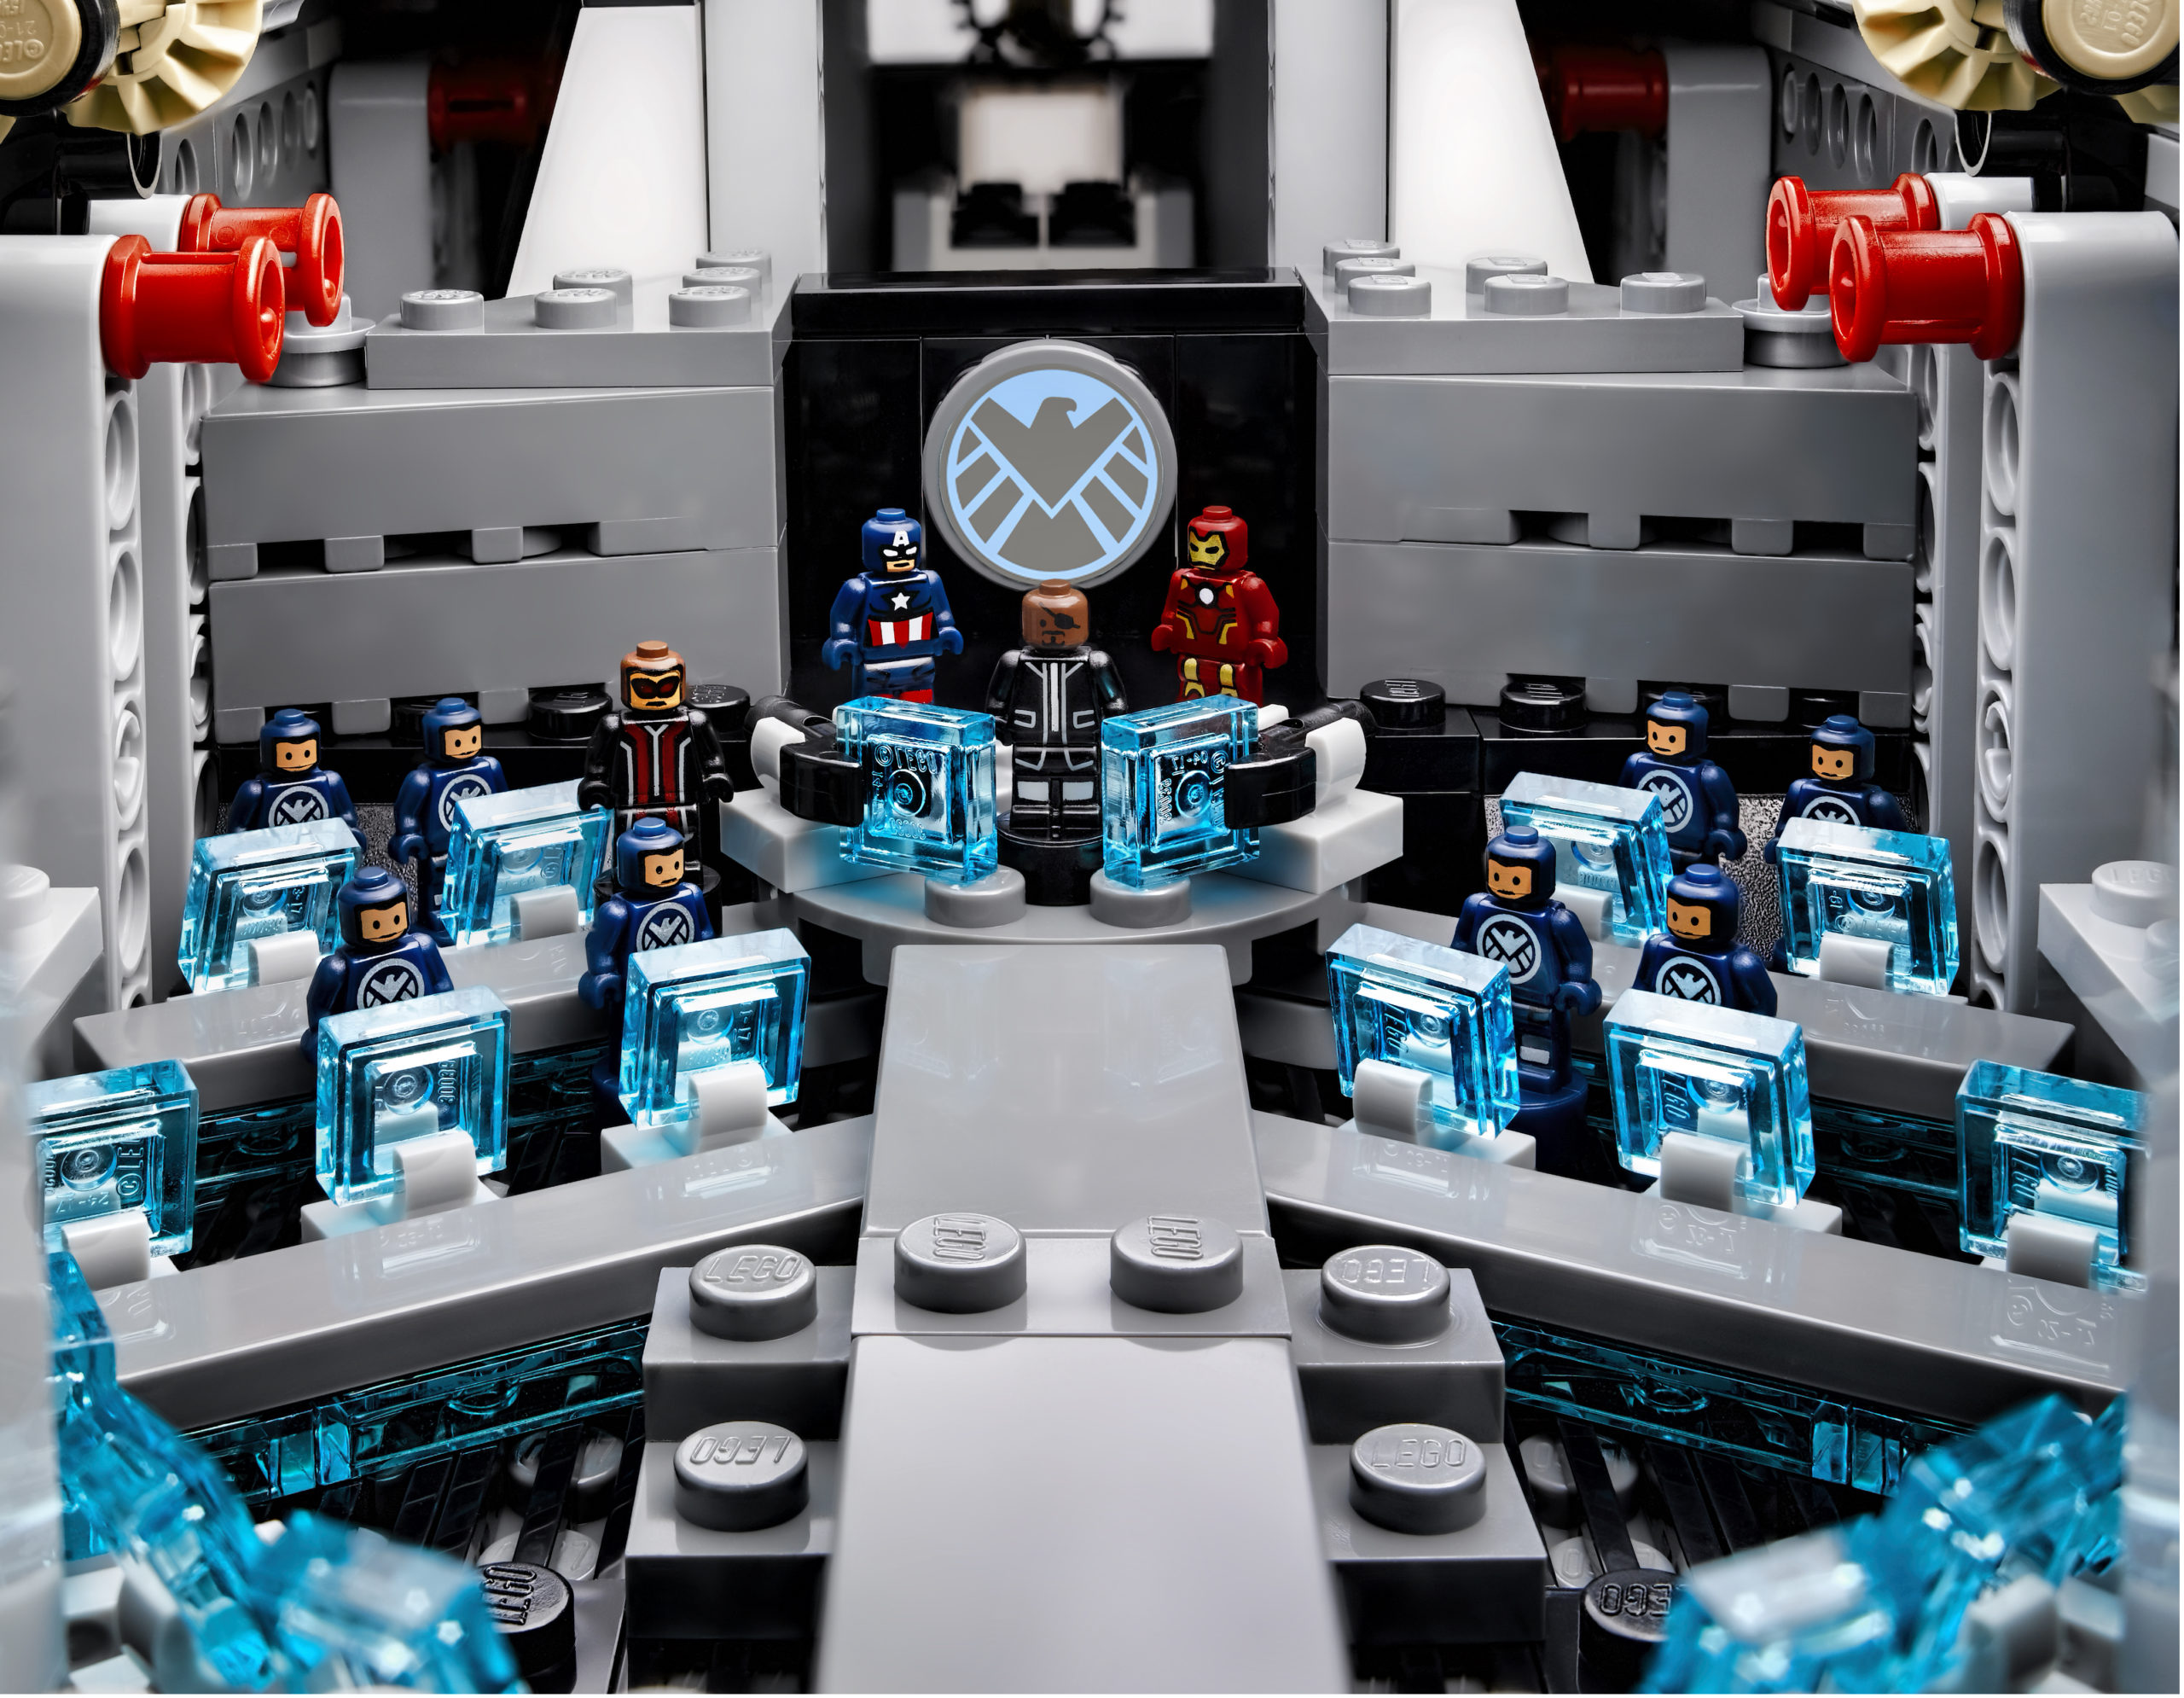 New Lego SHIELD Helicarrier Is Gigantic, As It Should Be